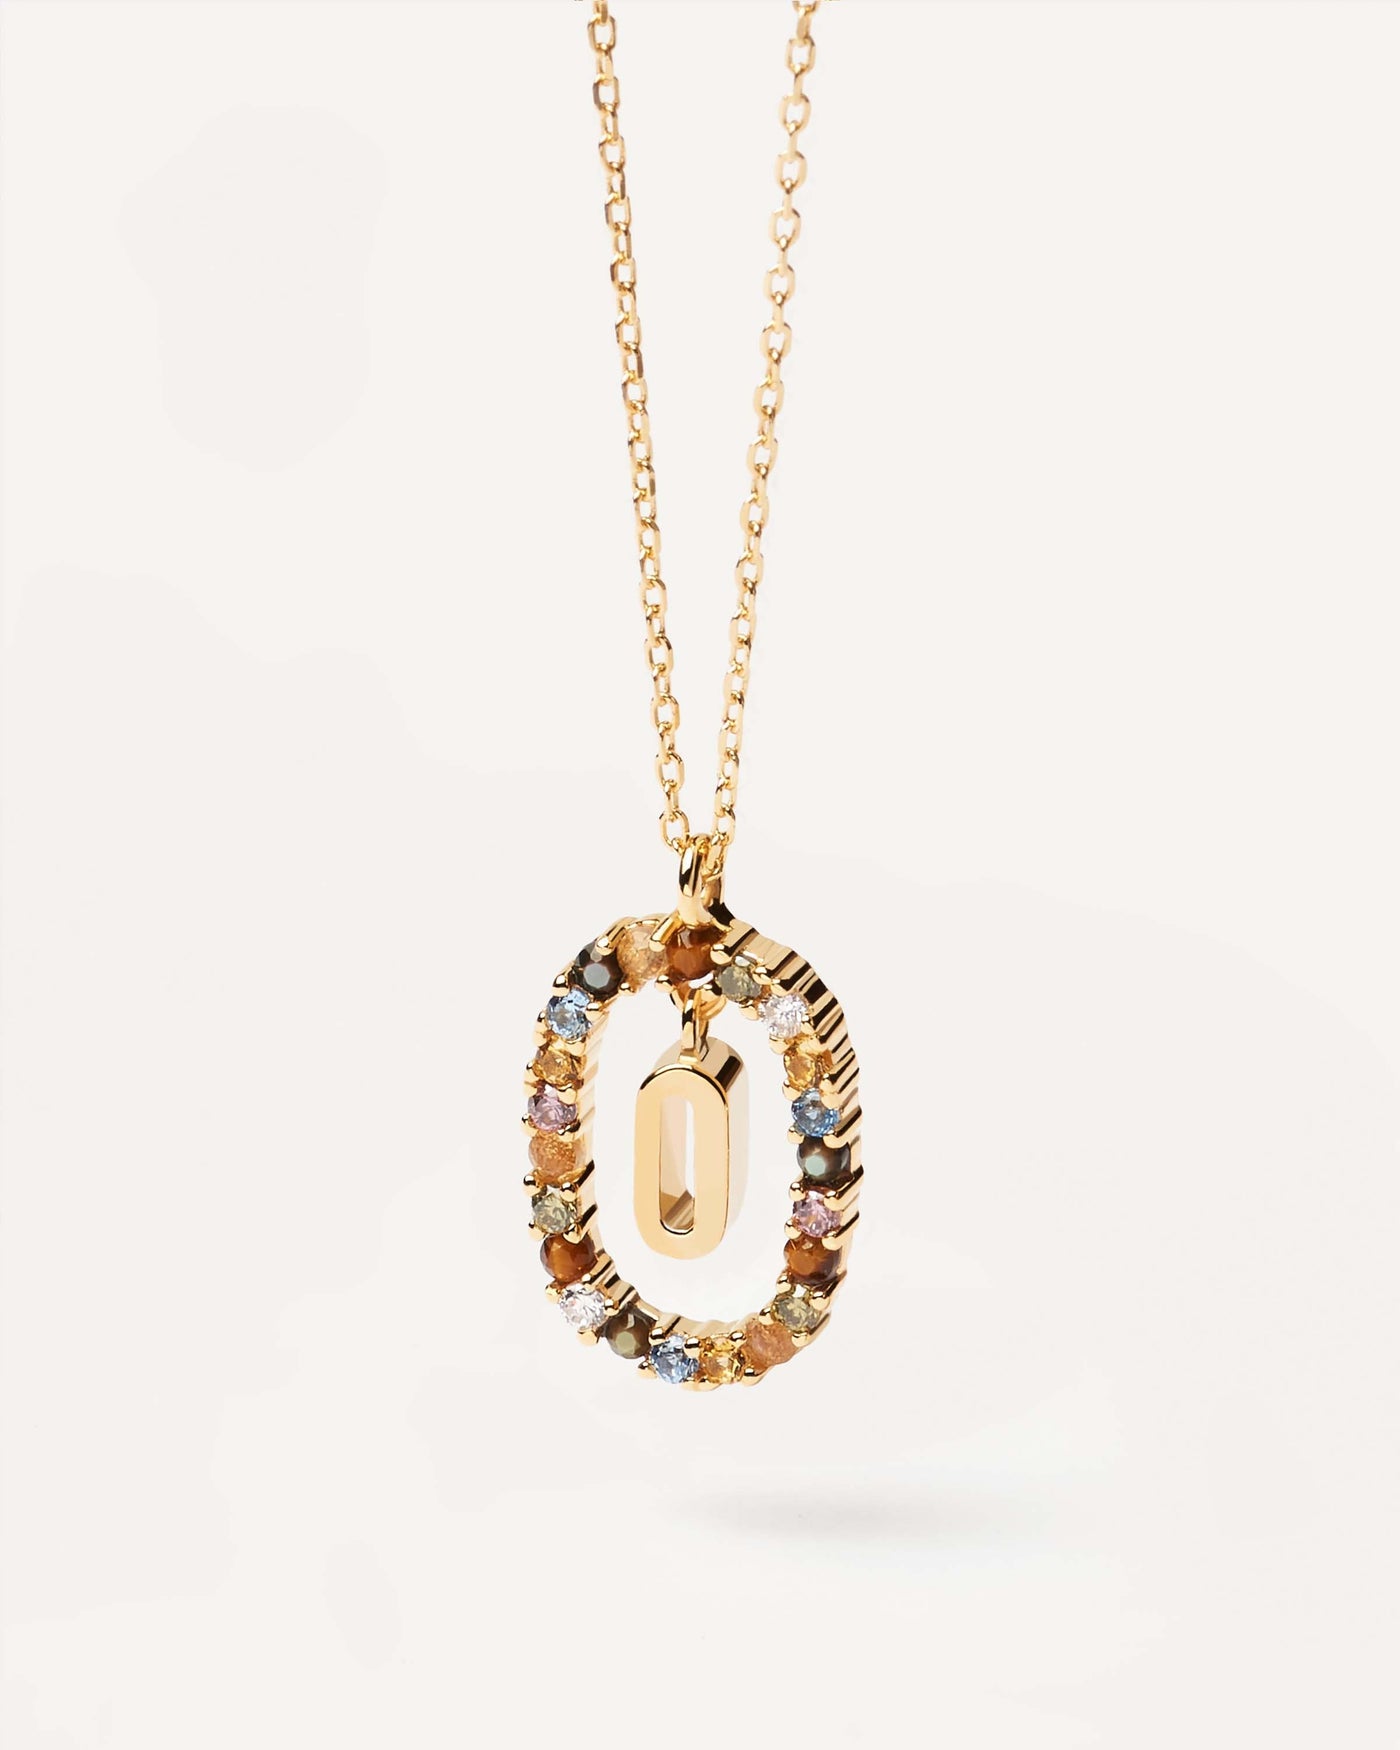 2023 Selection | Letter O necklace. Initial O necklace in gold-plated silver, circled by colorful gemstones. Get the latest arrival from PDPAOLA. Place your order safely and get this Best Seller. Free Shipping.